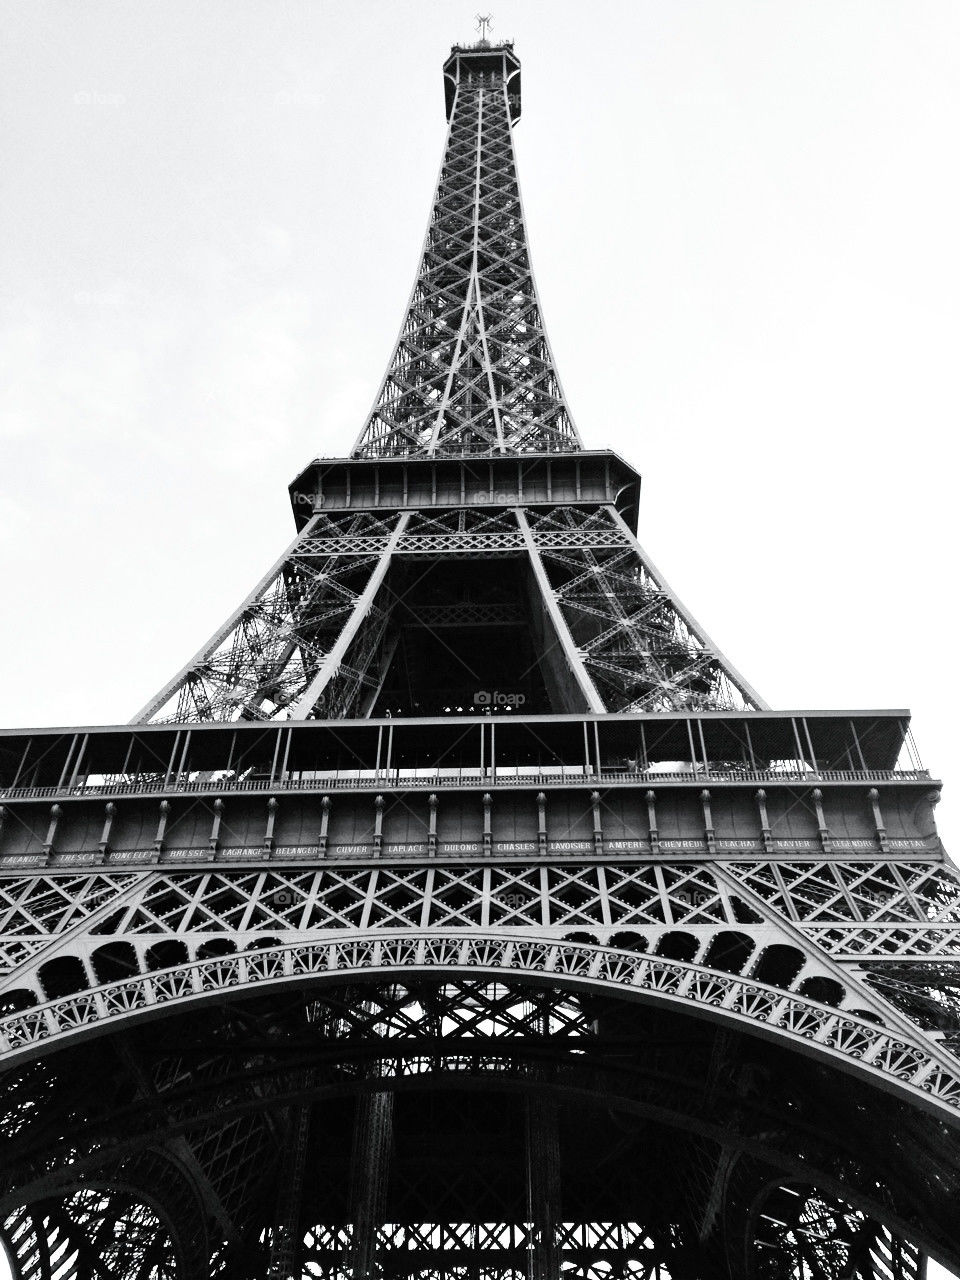 The Eiffel Tower in Paris, black and white.